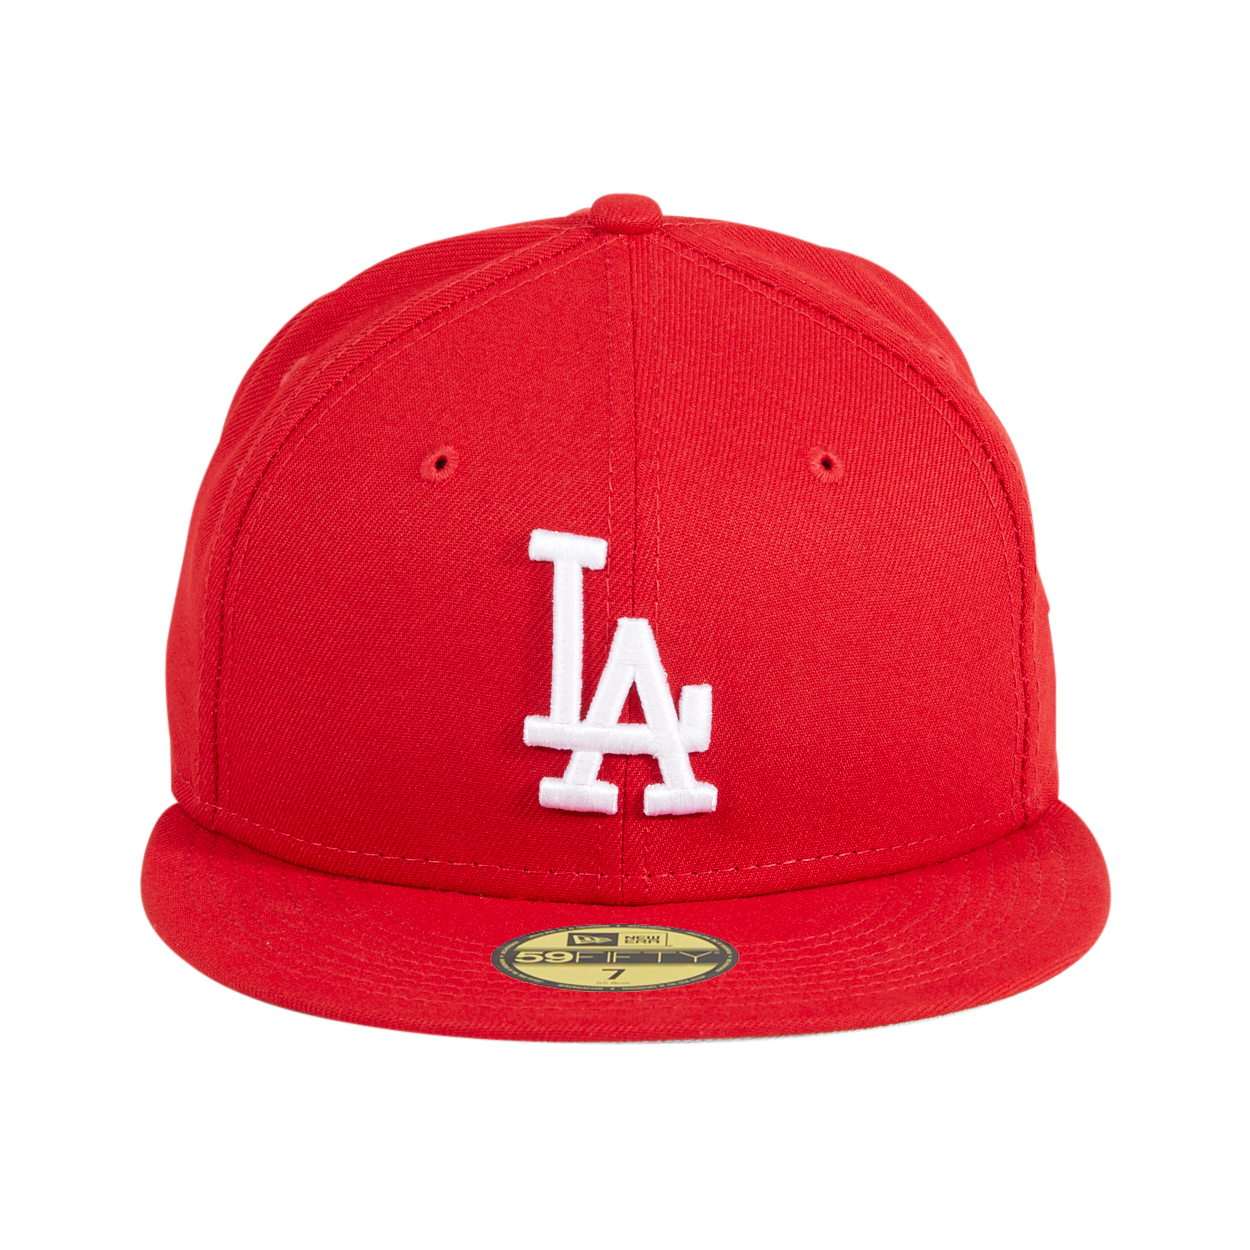 Los Angeles Dodgers Hat Red